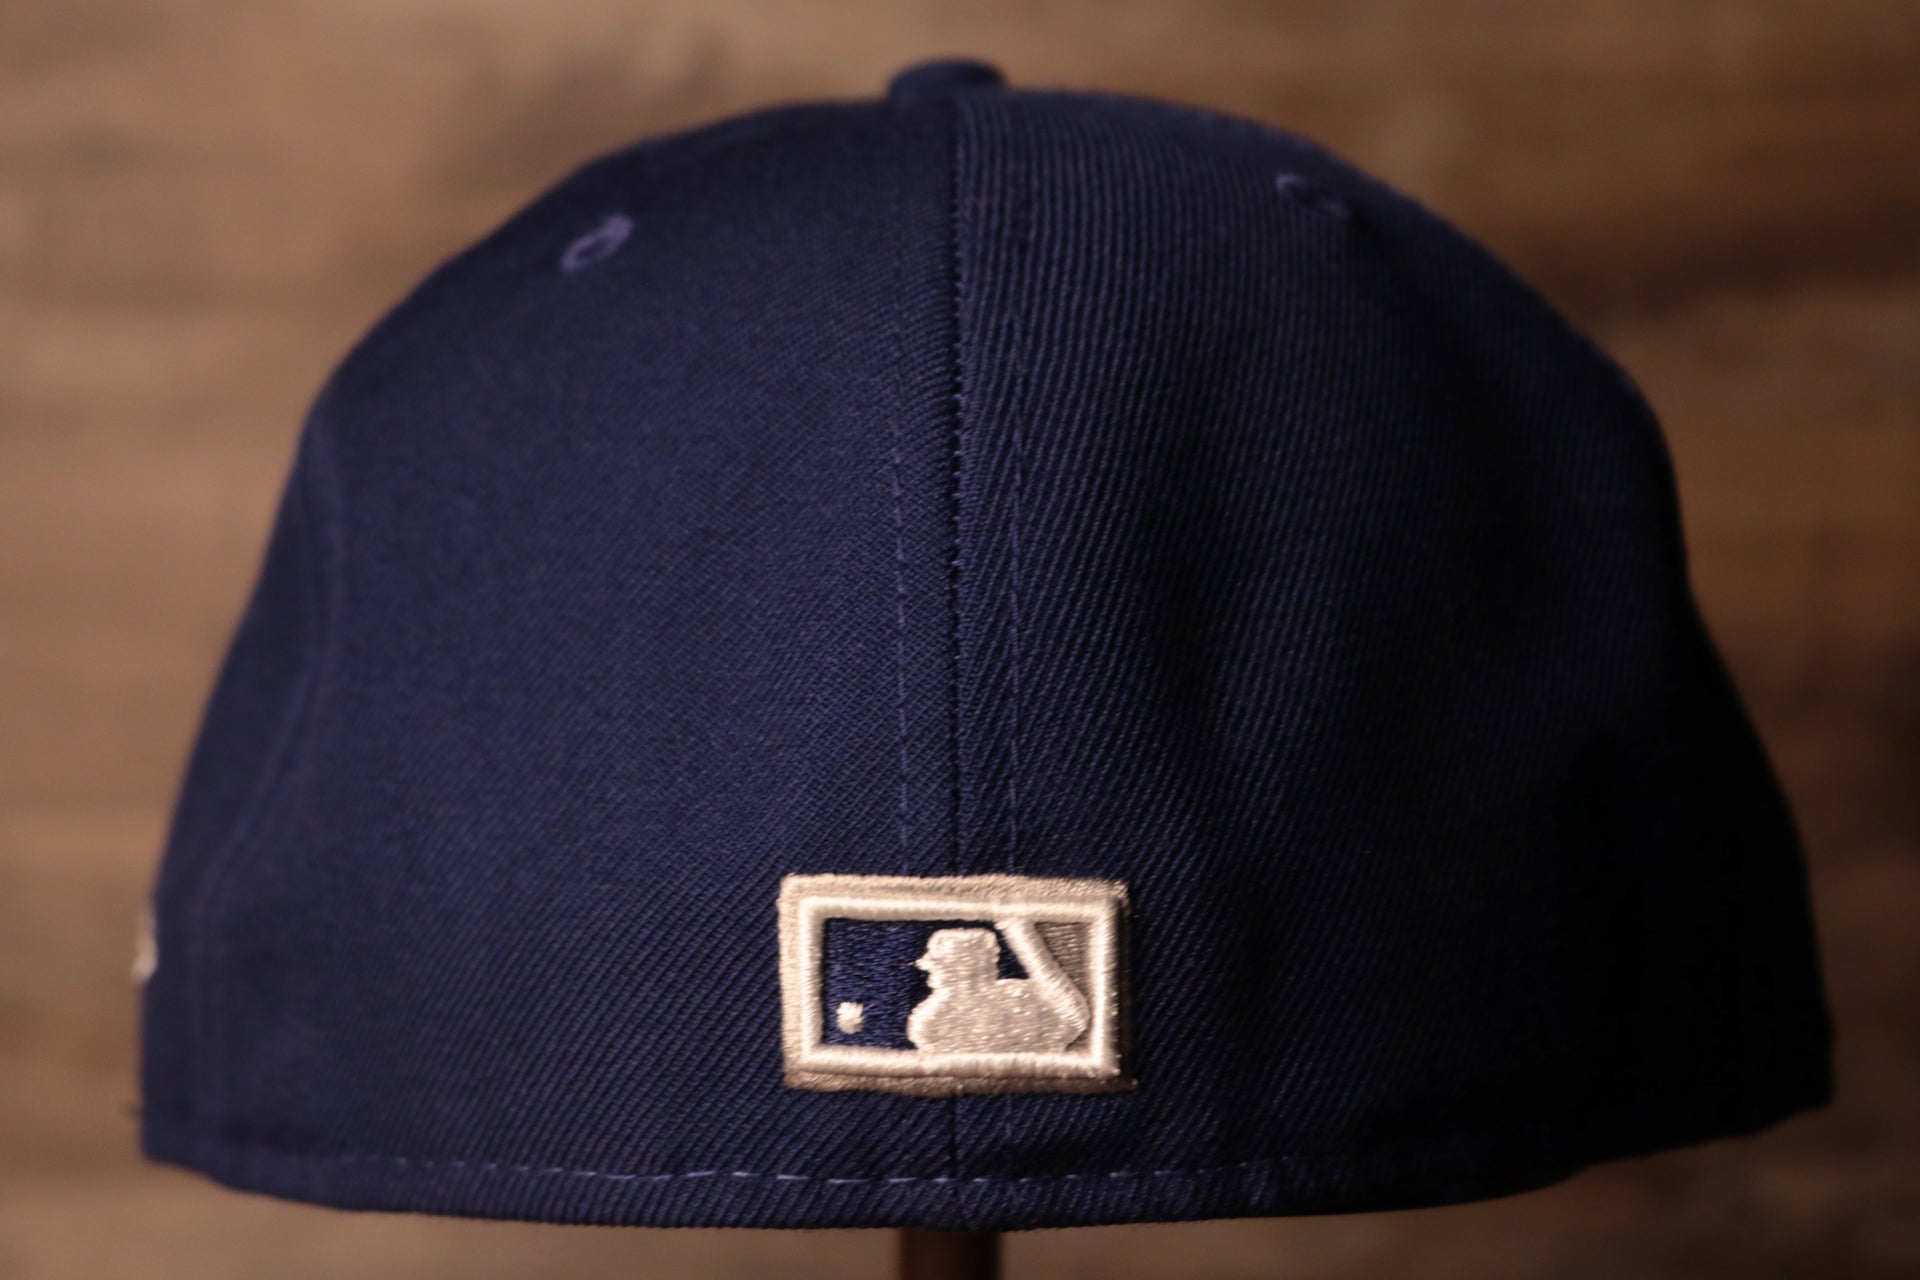 The back side has the MLB logo on it Dodgers Gray Bottom Fitted Cap | Los Angeles Dodgers Grey Bottom Royal Blue Fitted Hat